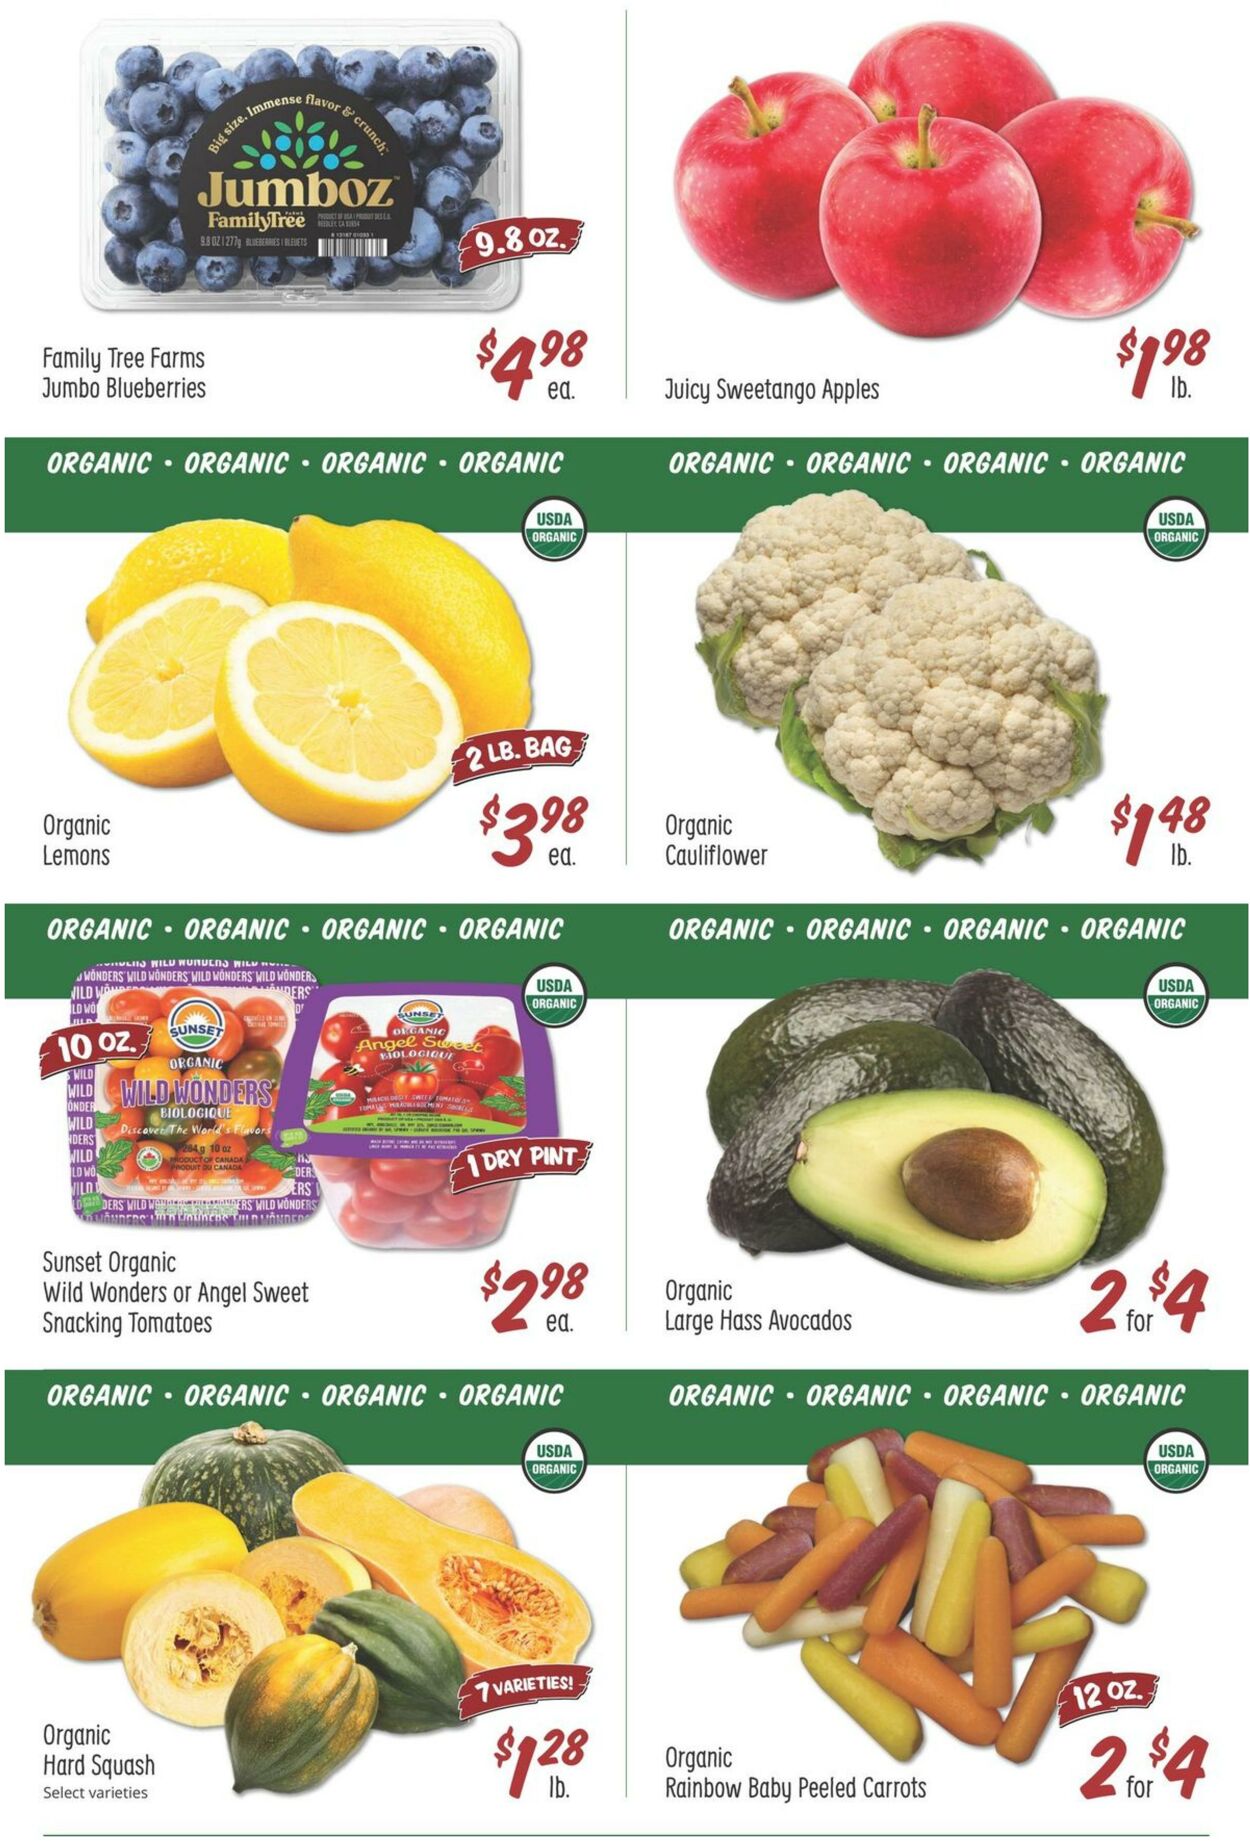 Weekly ad Sprouts 10/05/2022 - 10/11/2022